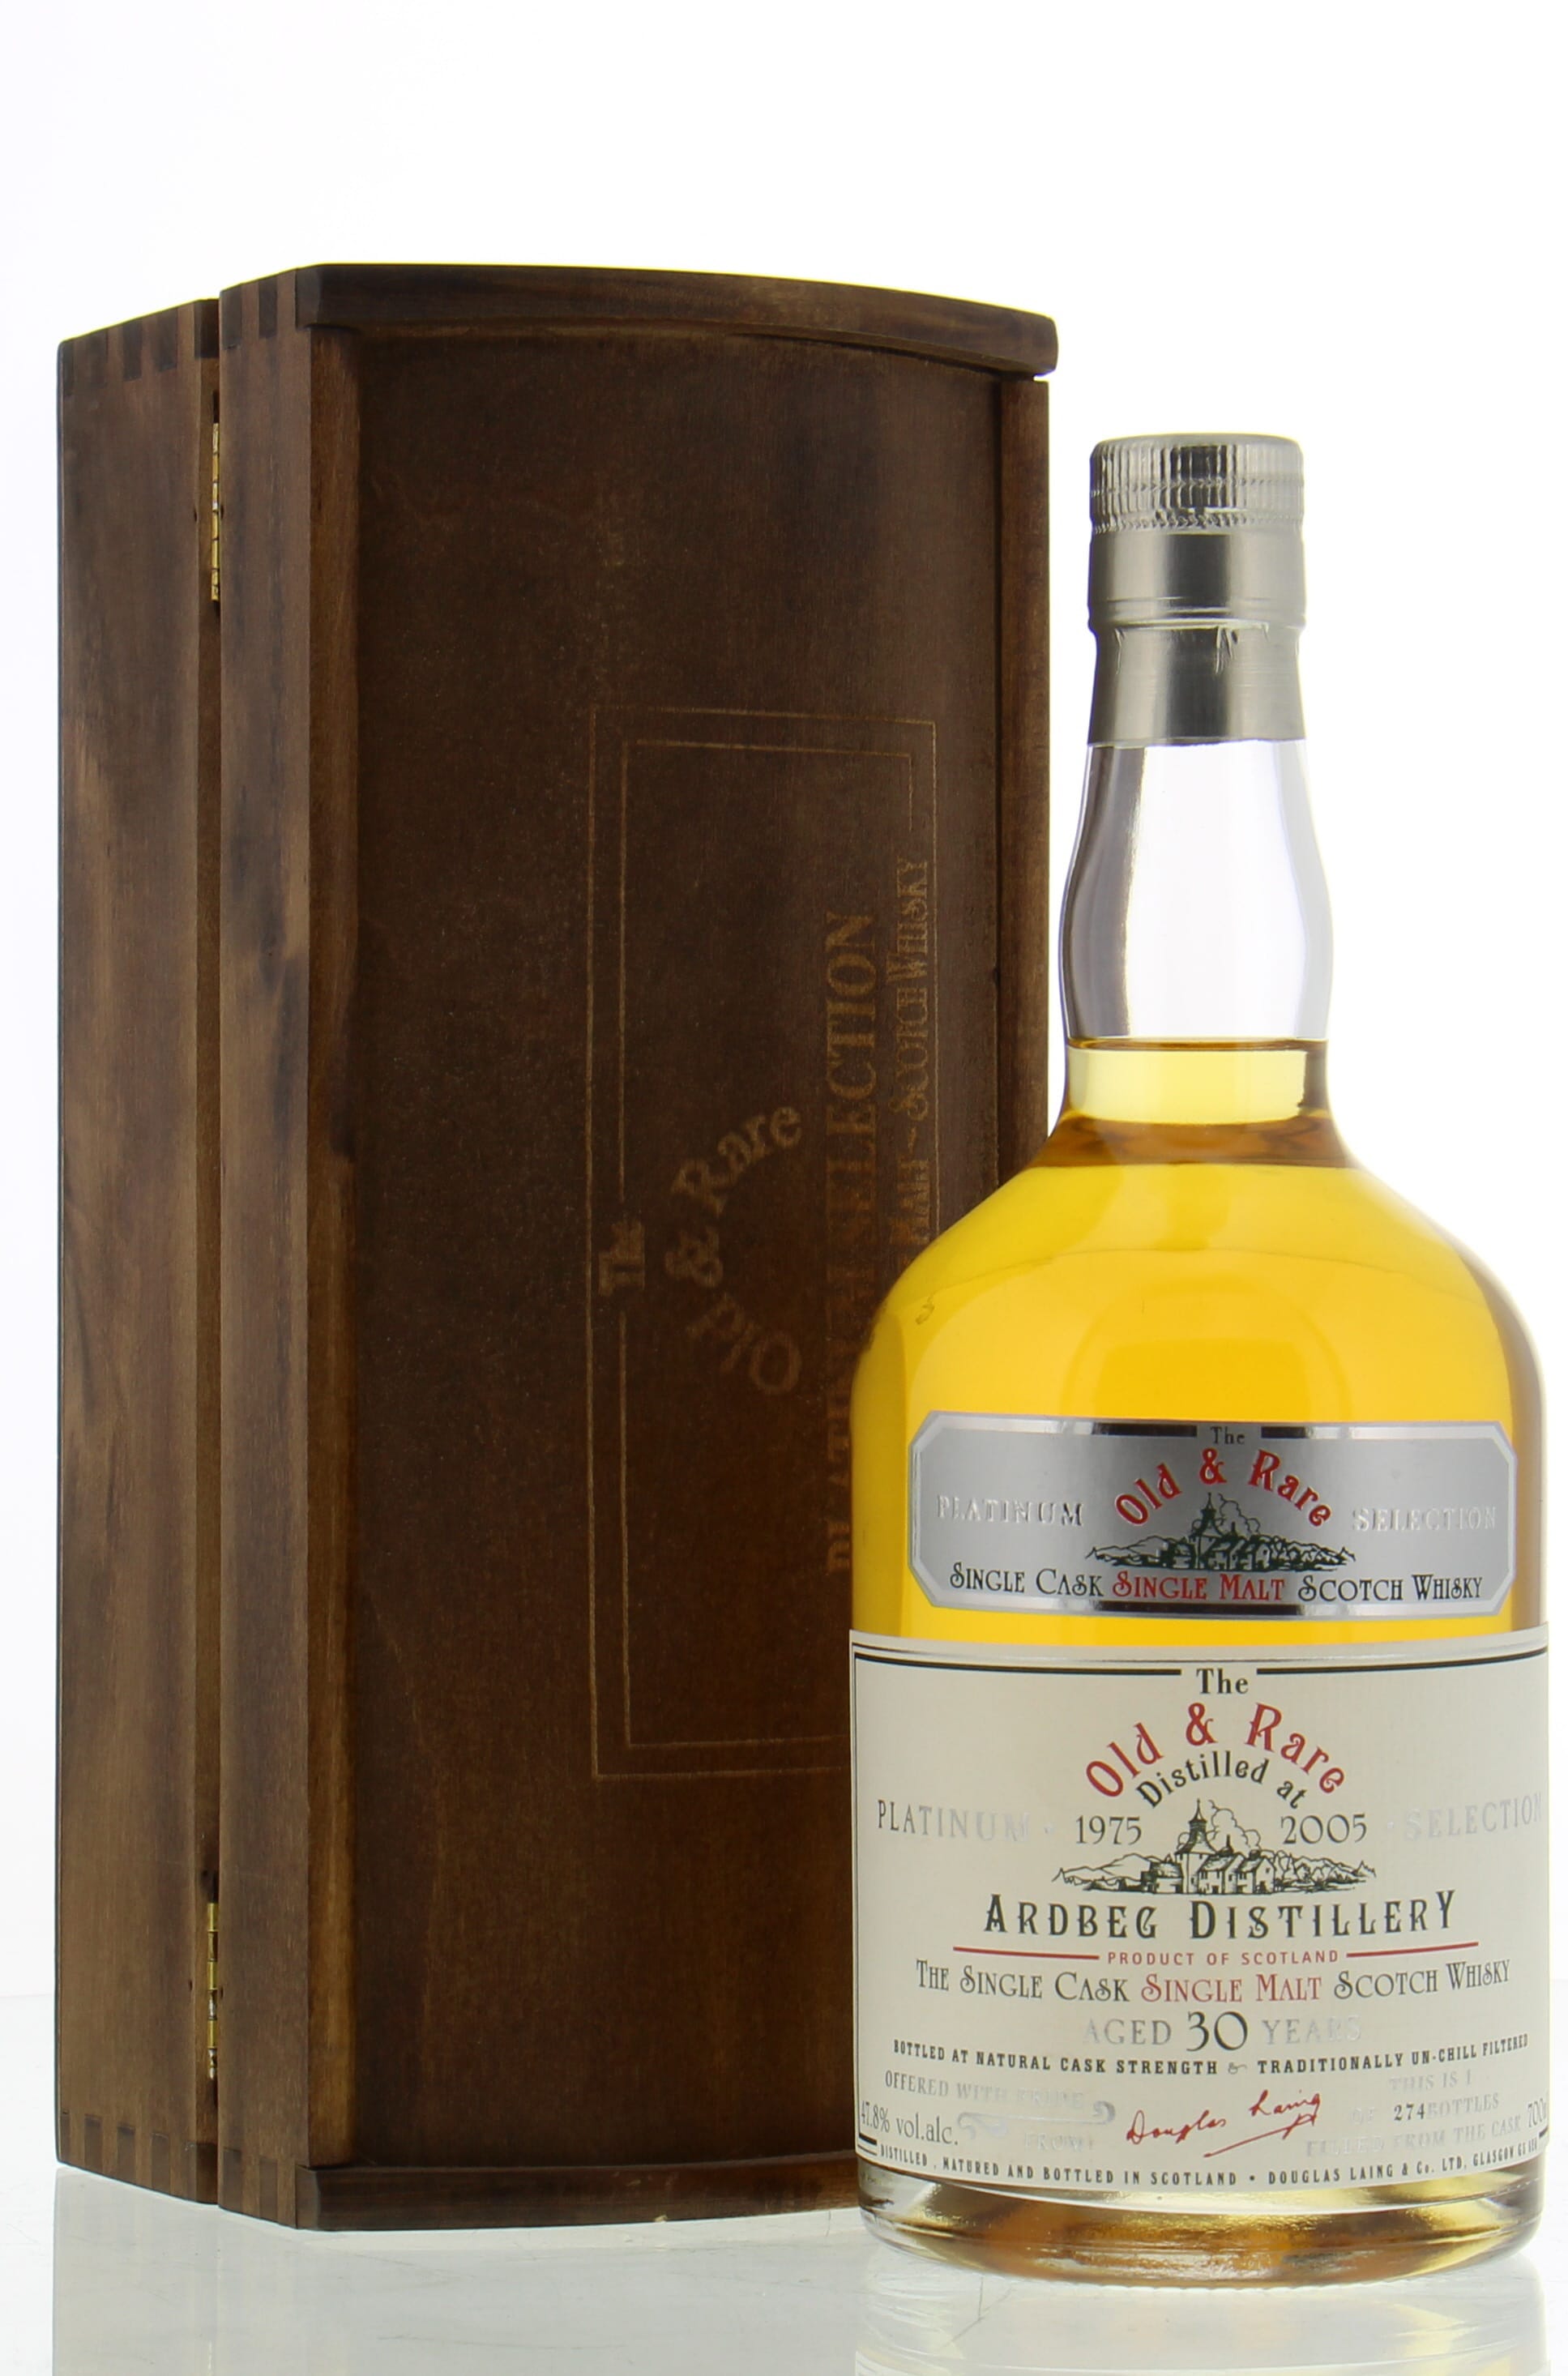 Ardbeg - 30 years Old & Rare The Platinum Selection 47.8% 1975 In Original Wooden Case